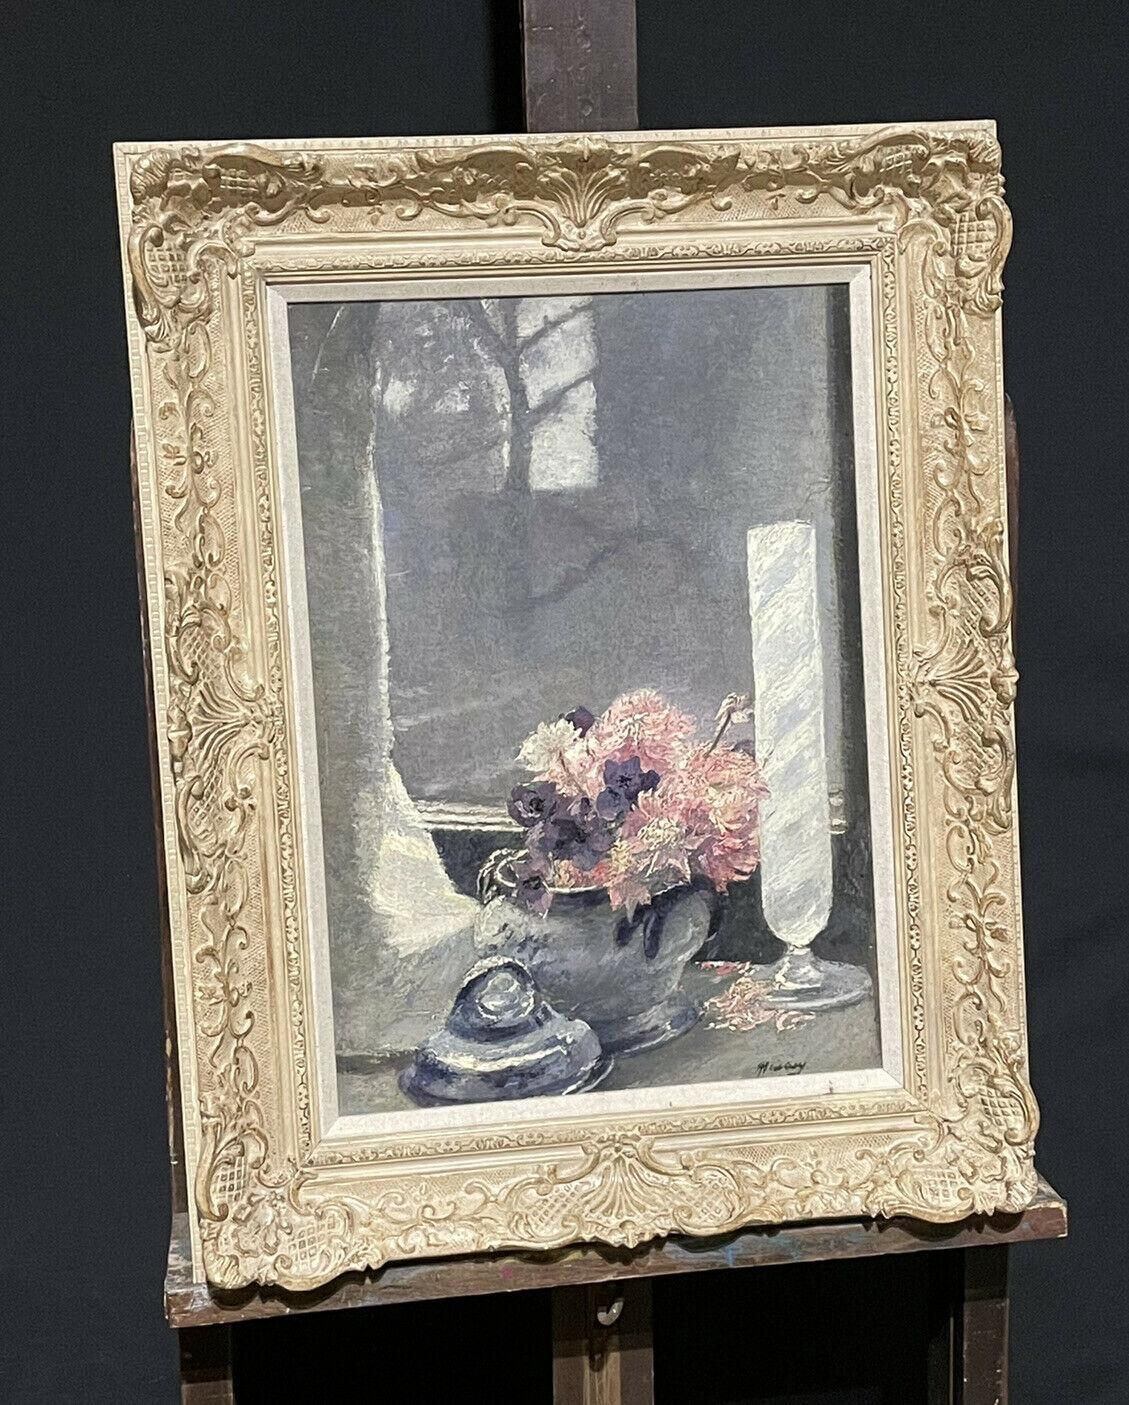 1930'S FRENCH IMPRESSIONIST SIGNED OIL - BEAUTIFUL FLOWERS ON WINDOW SILL VIEW - Impressionist Painting by French Impressionist